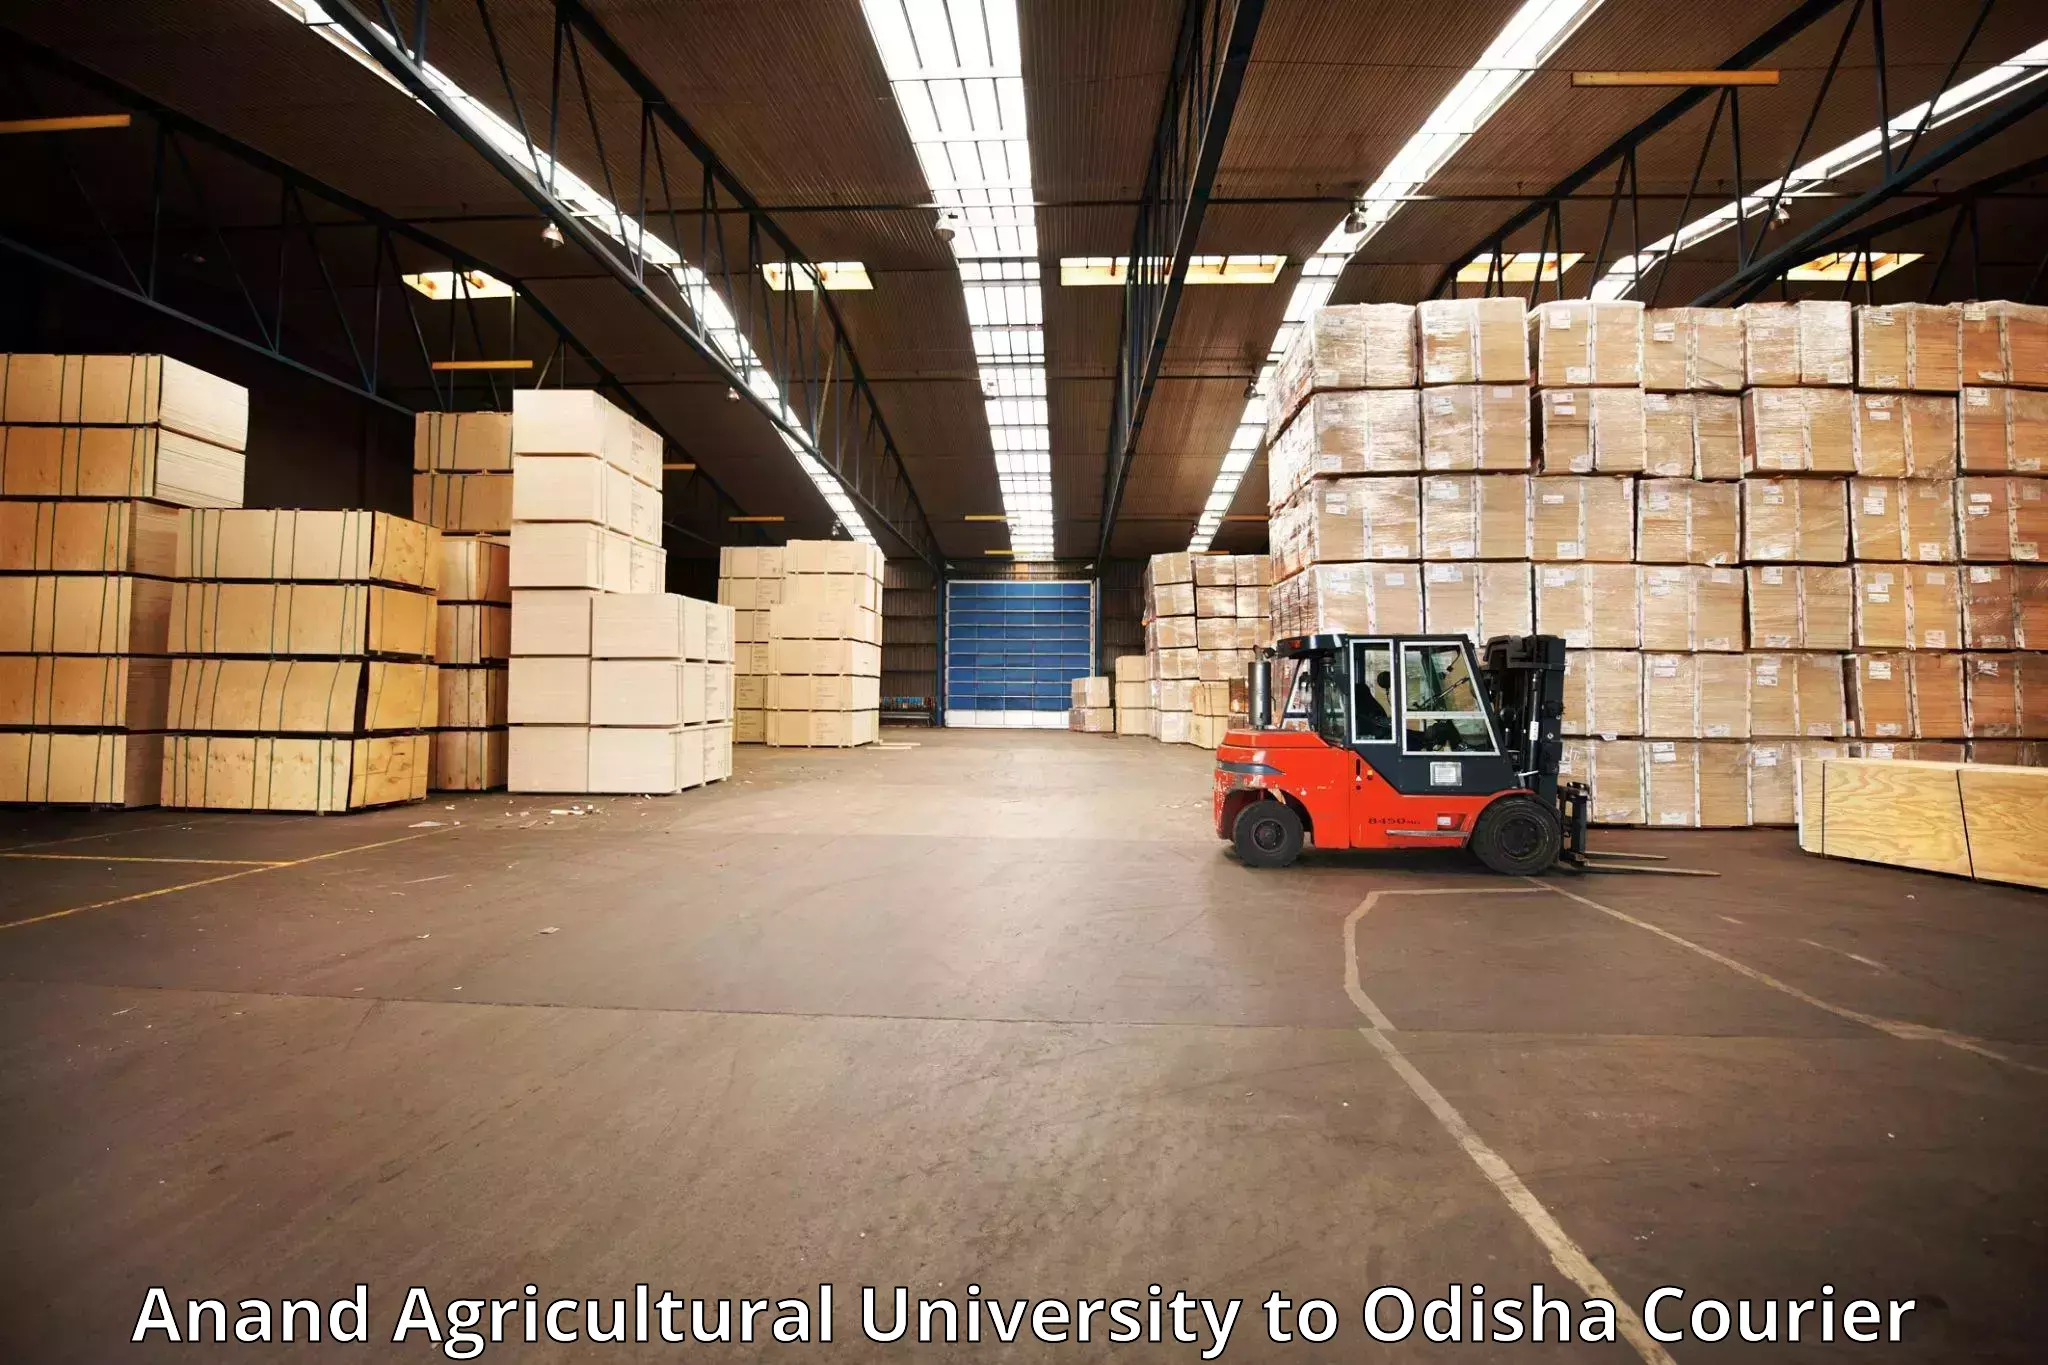 Baggage transport network Anand Agricultural University to Tihidi